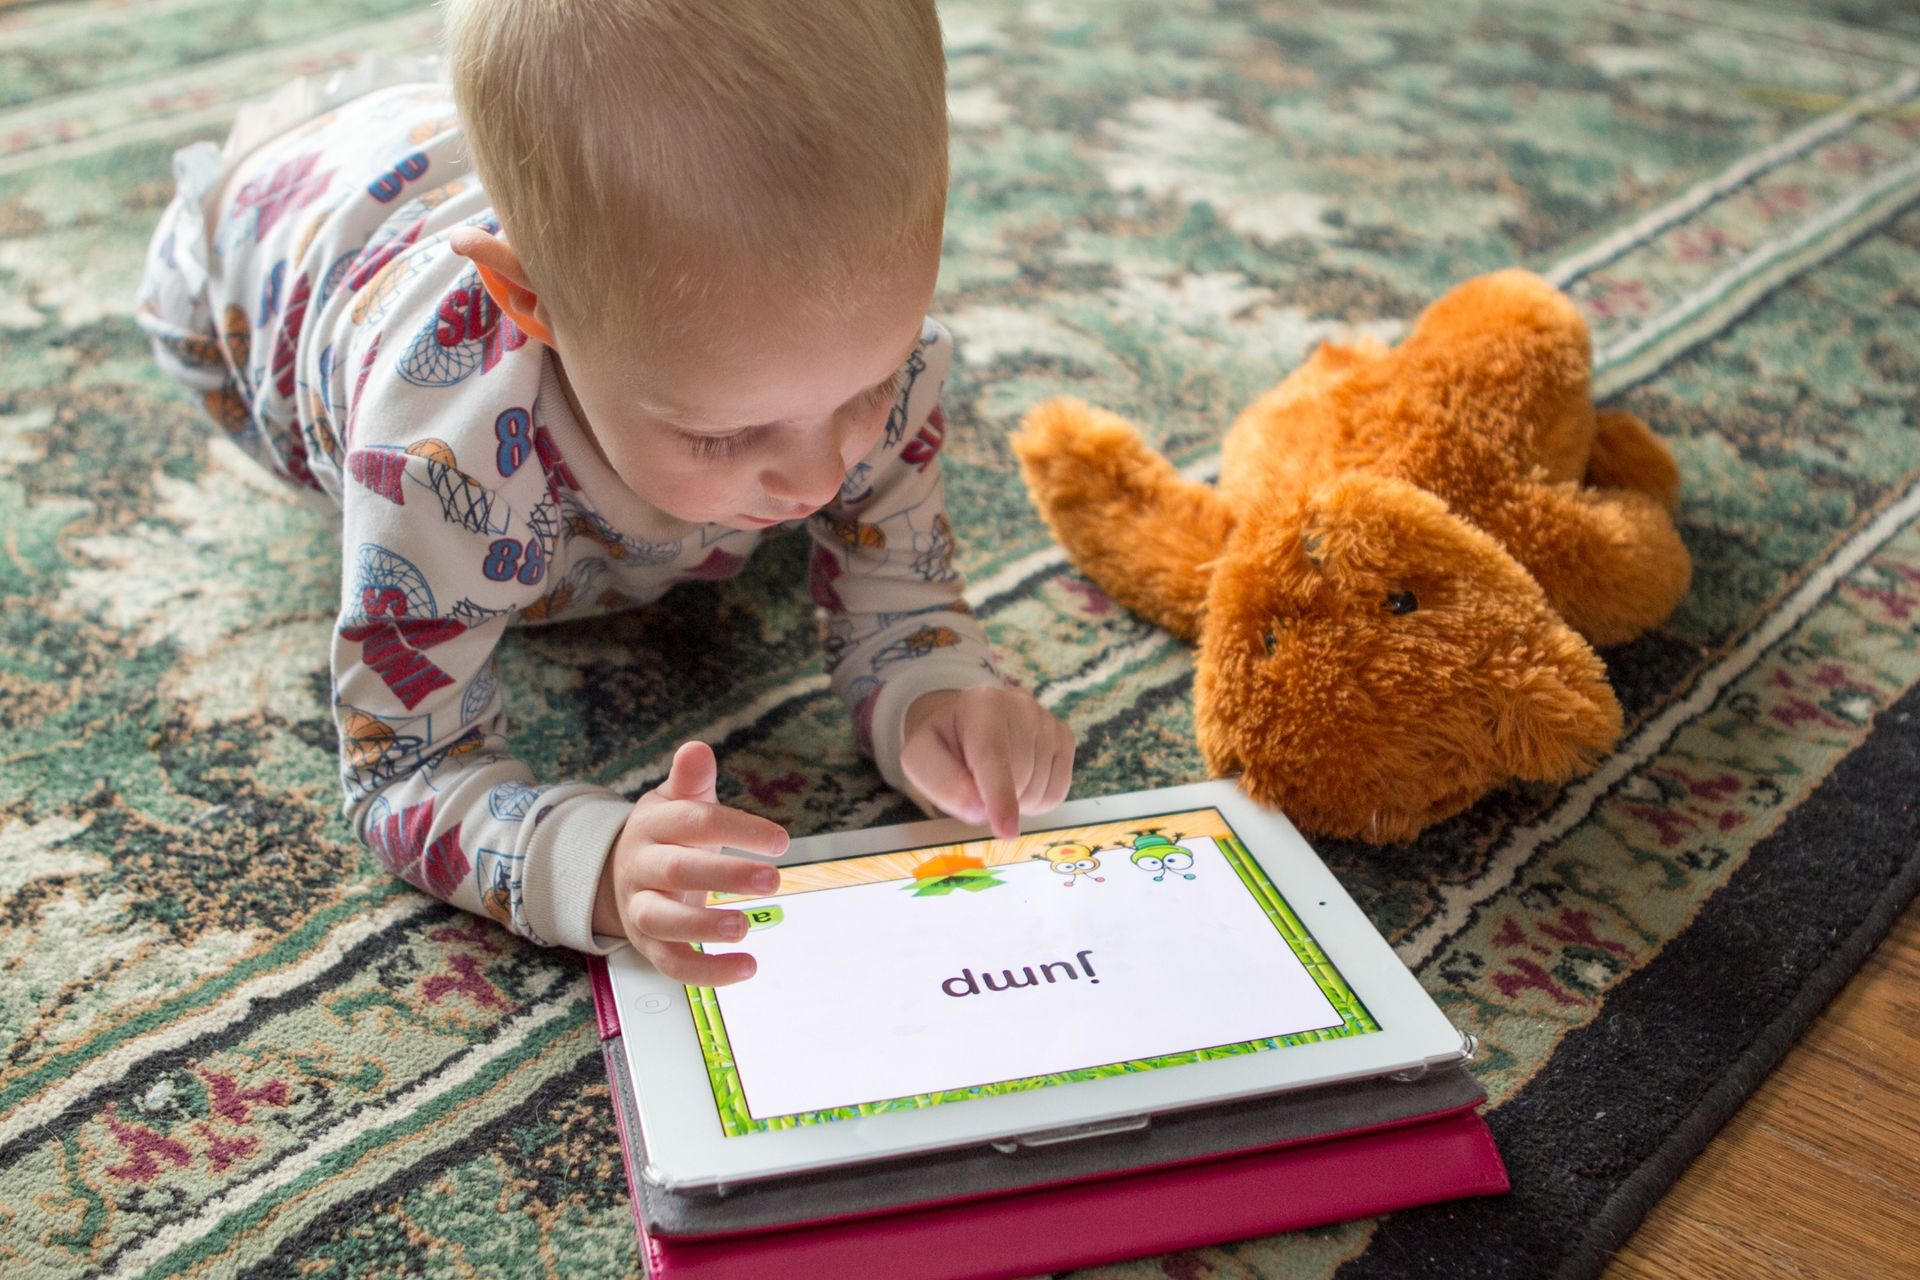 A toddler lies on a rug in his home and learns words with a game on a tablet.